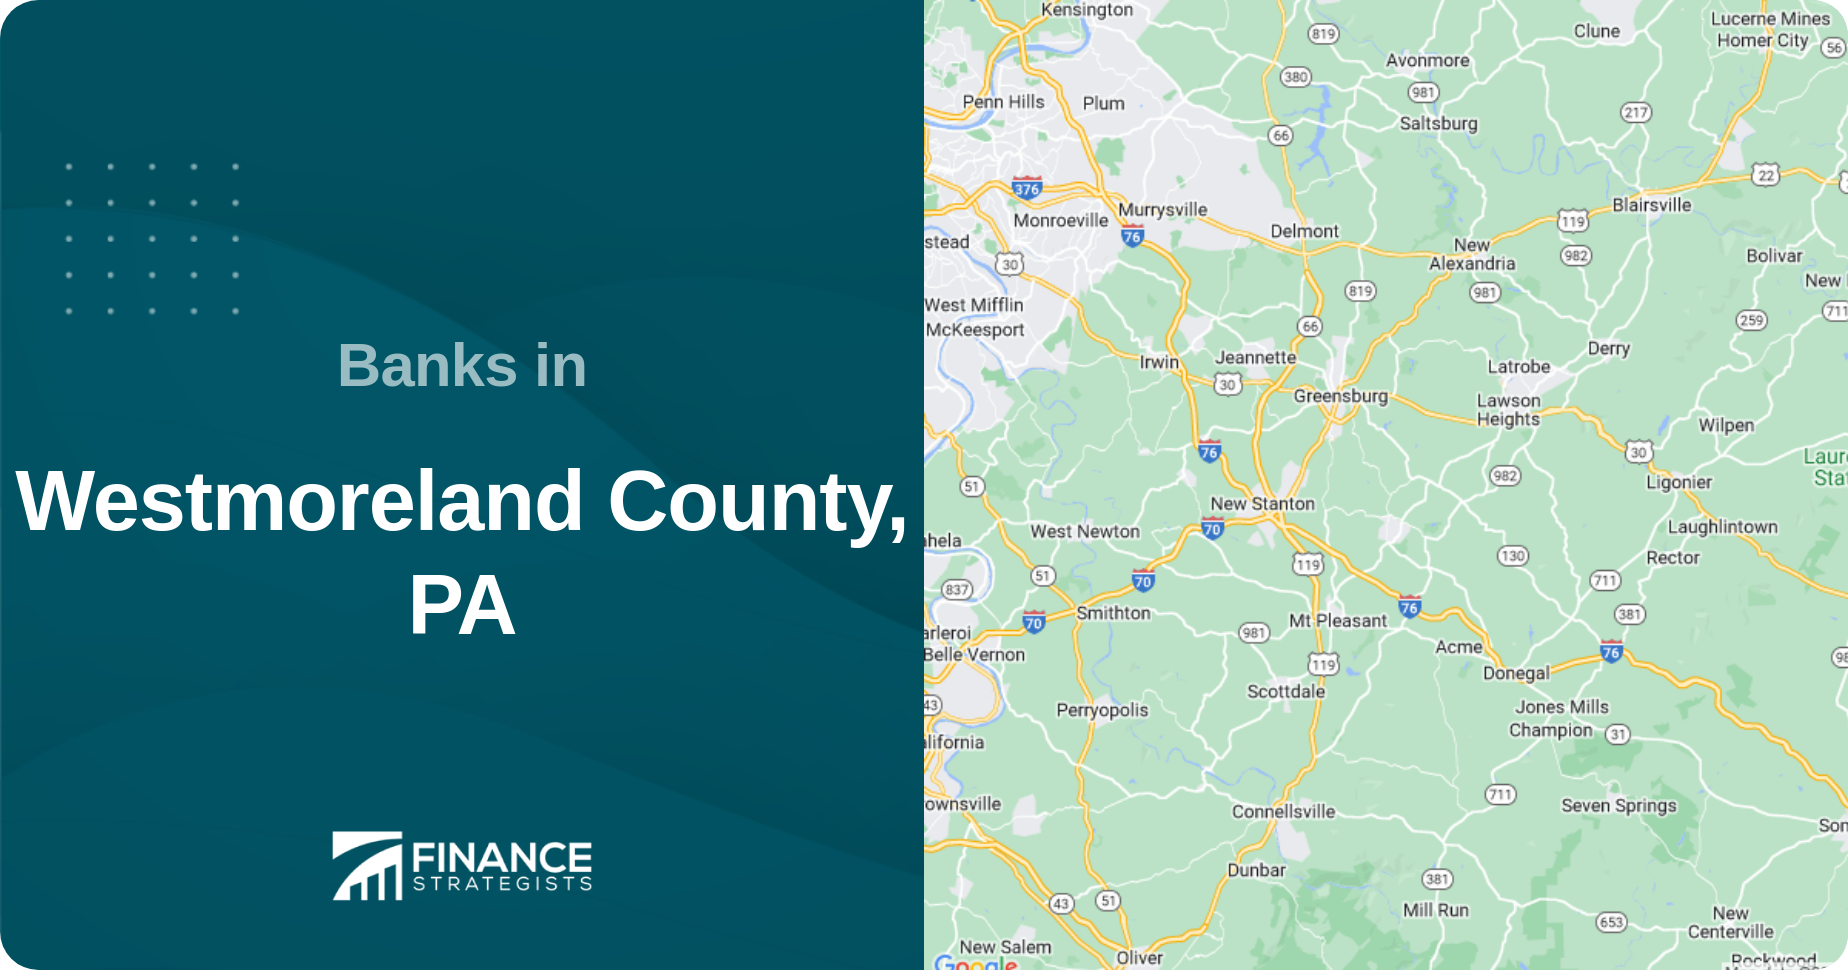 Banks in Westmoreland County, PA